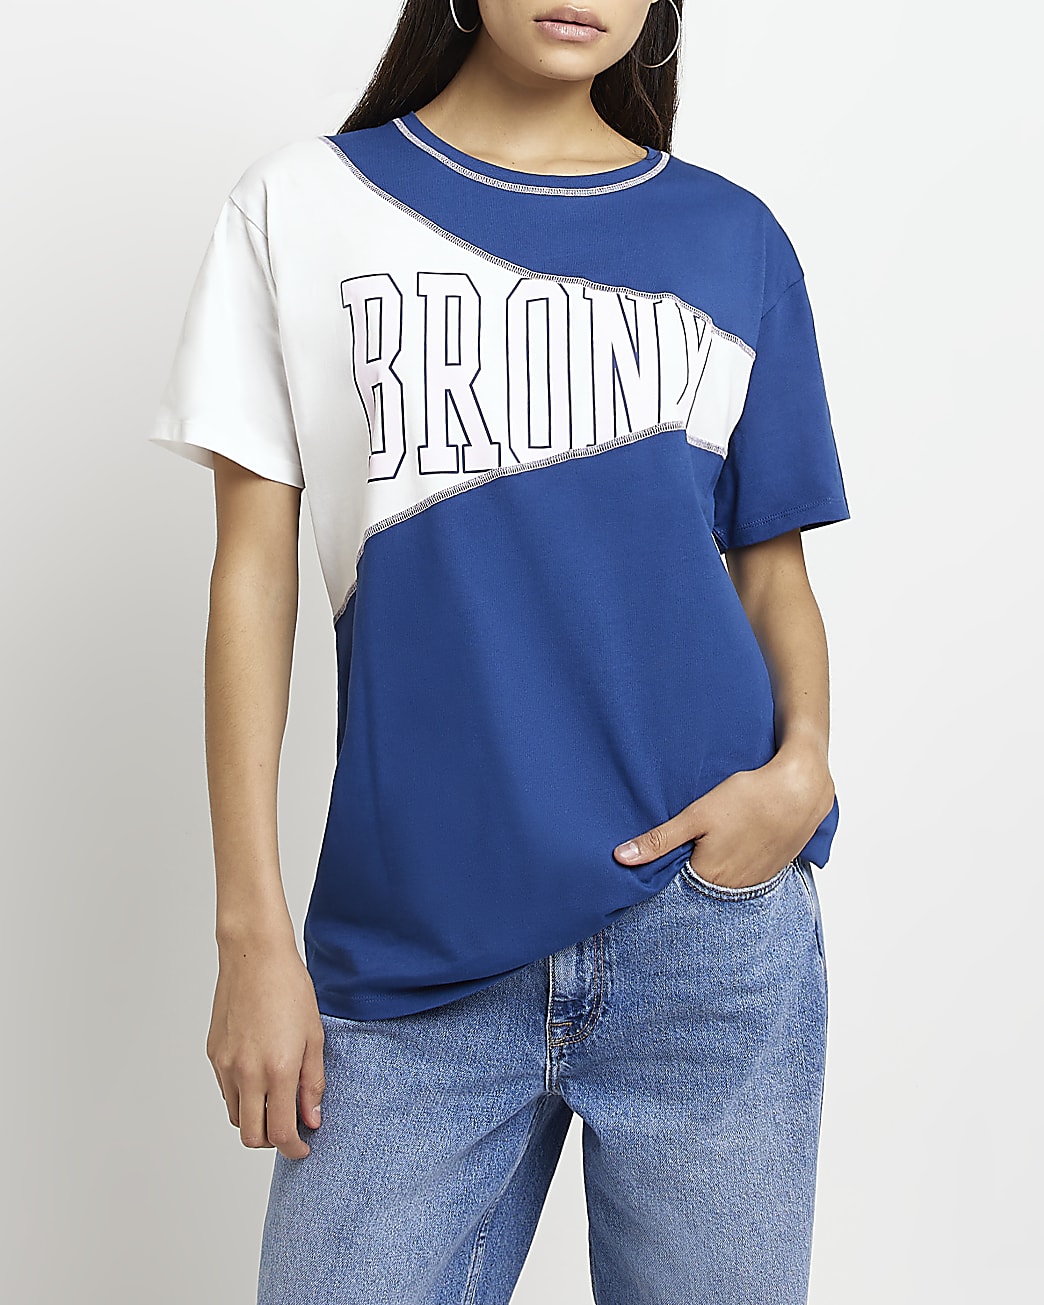 Navy oversized graphic t-shirt,River Island